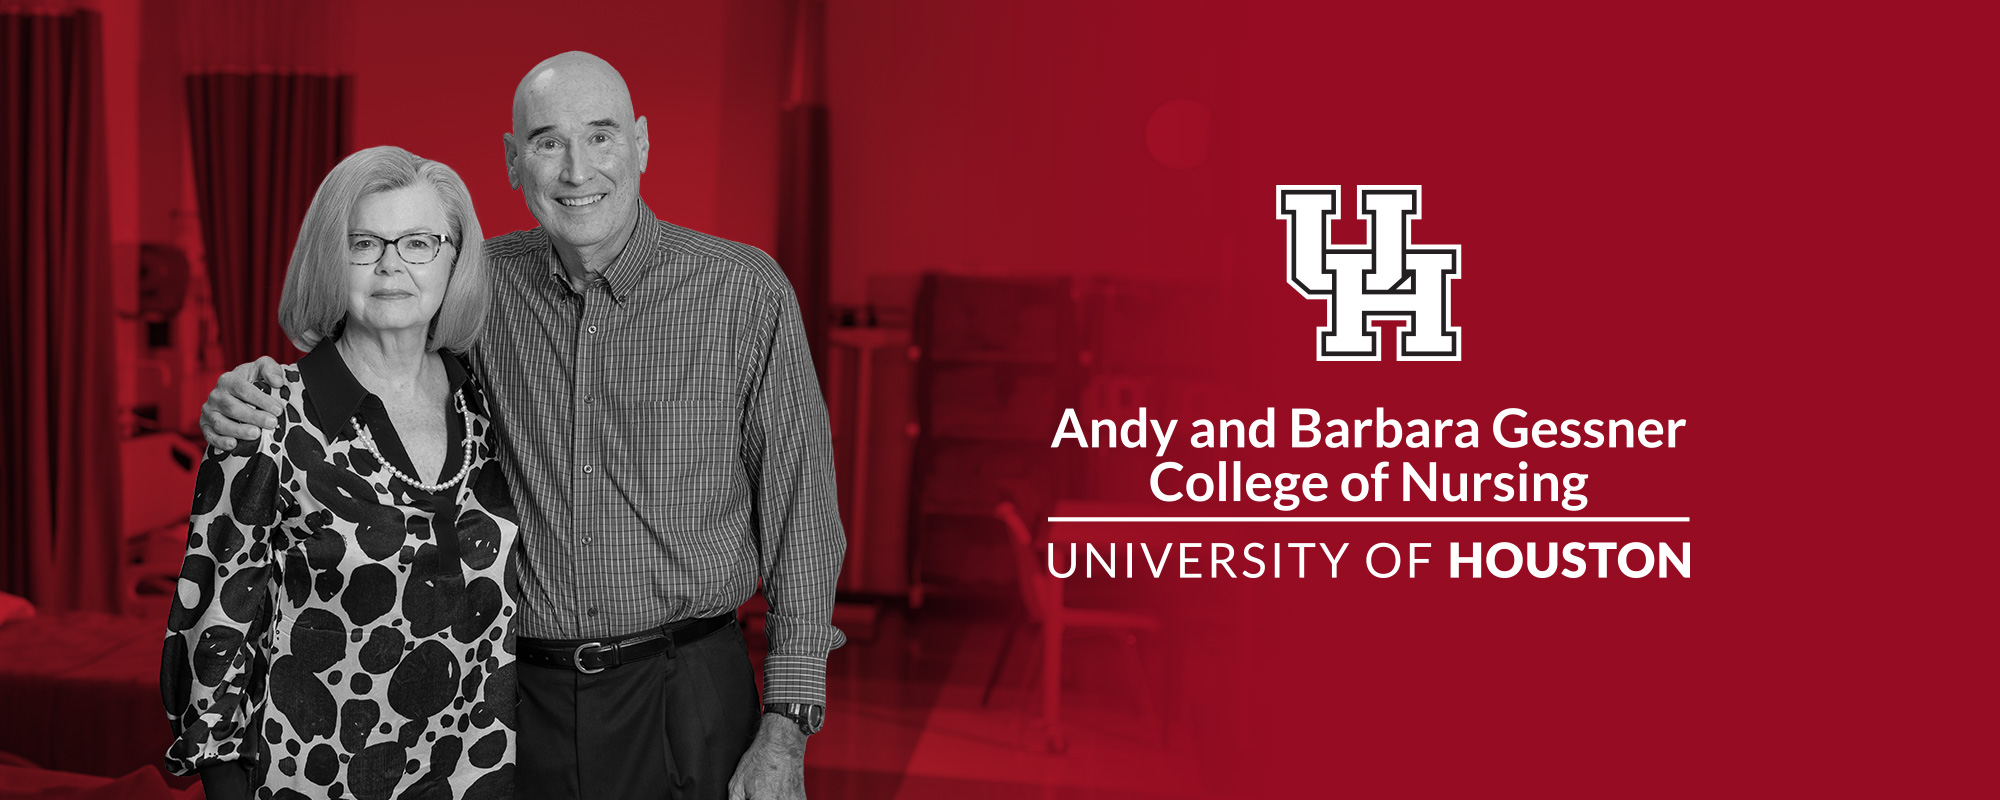 A composite image of an elderly couple, Andy and Barbara Gessners, next to the college logo: UH Andy and Barbara Gessner College of Nursing